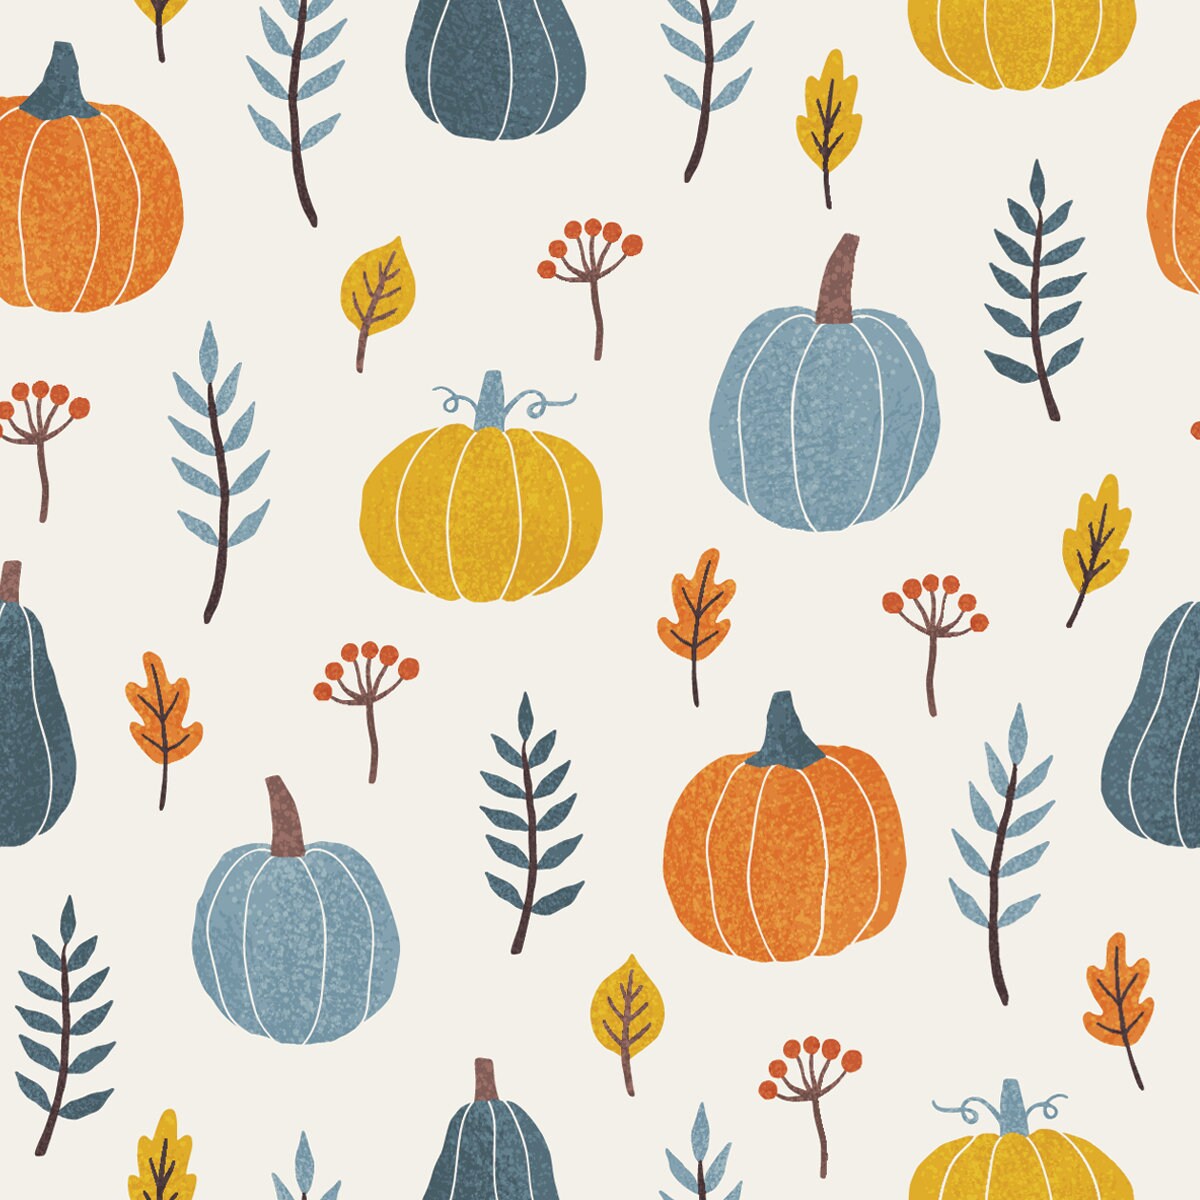 Colorful Pumpkins, Leafs and Branches. Seasonal Autumn Seamless Pattern Wallpaper Kitchen Mural